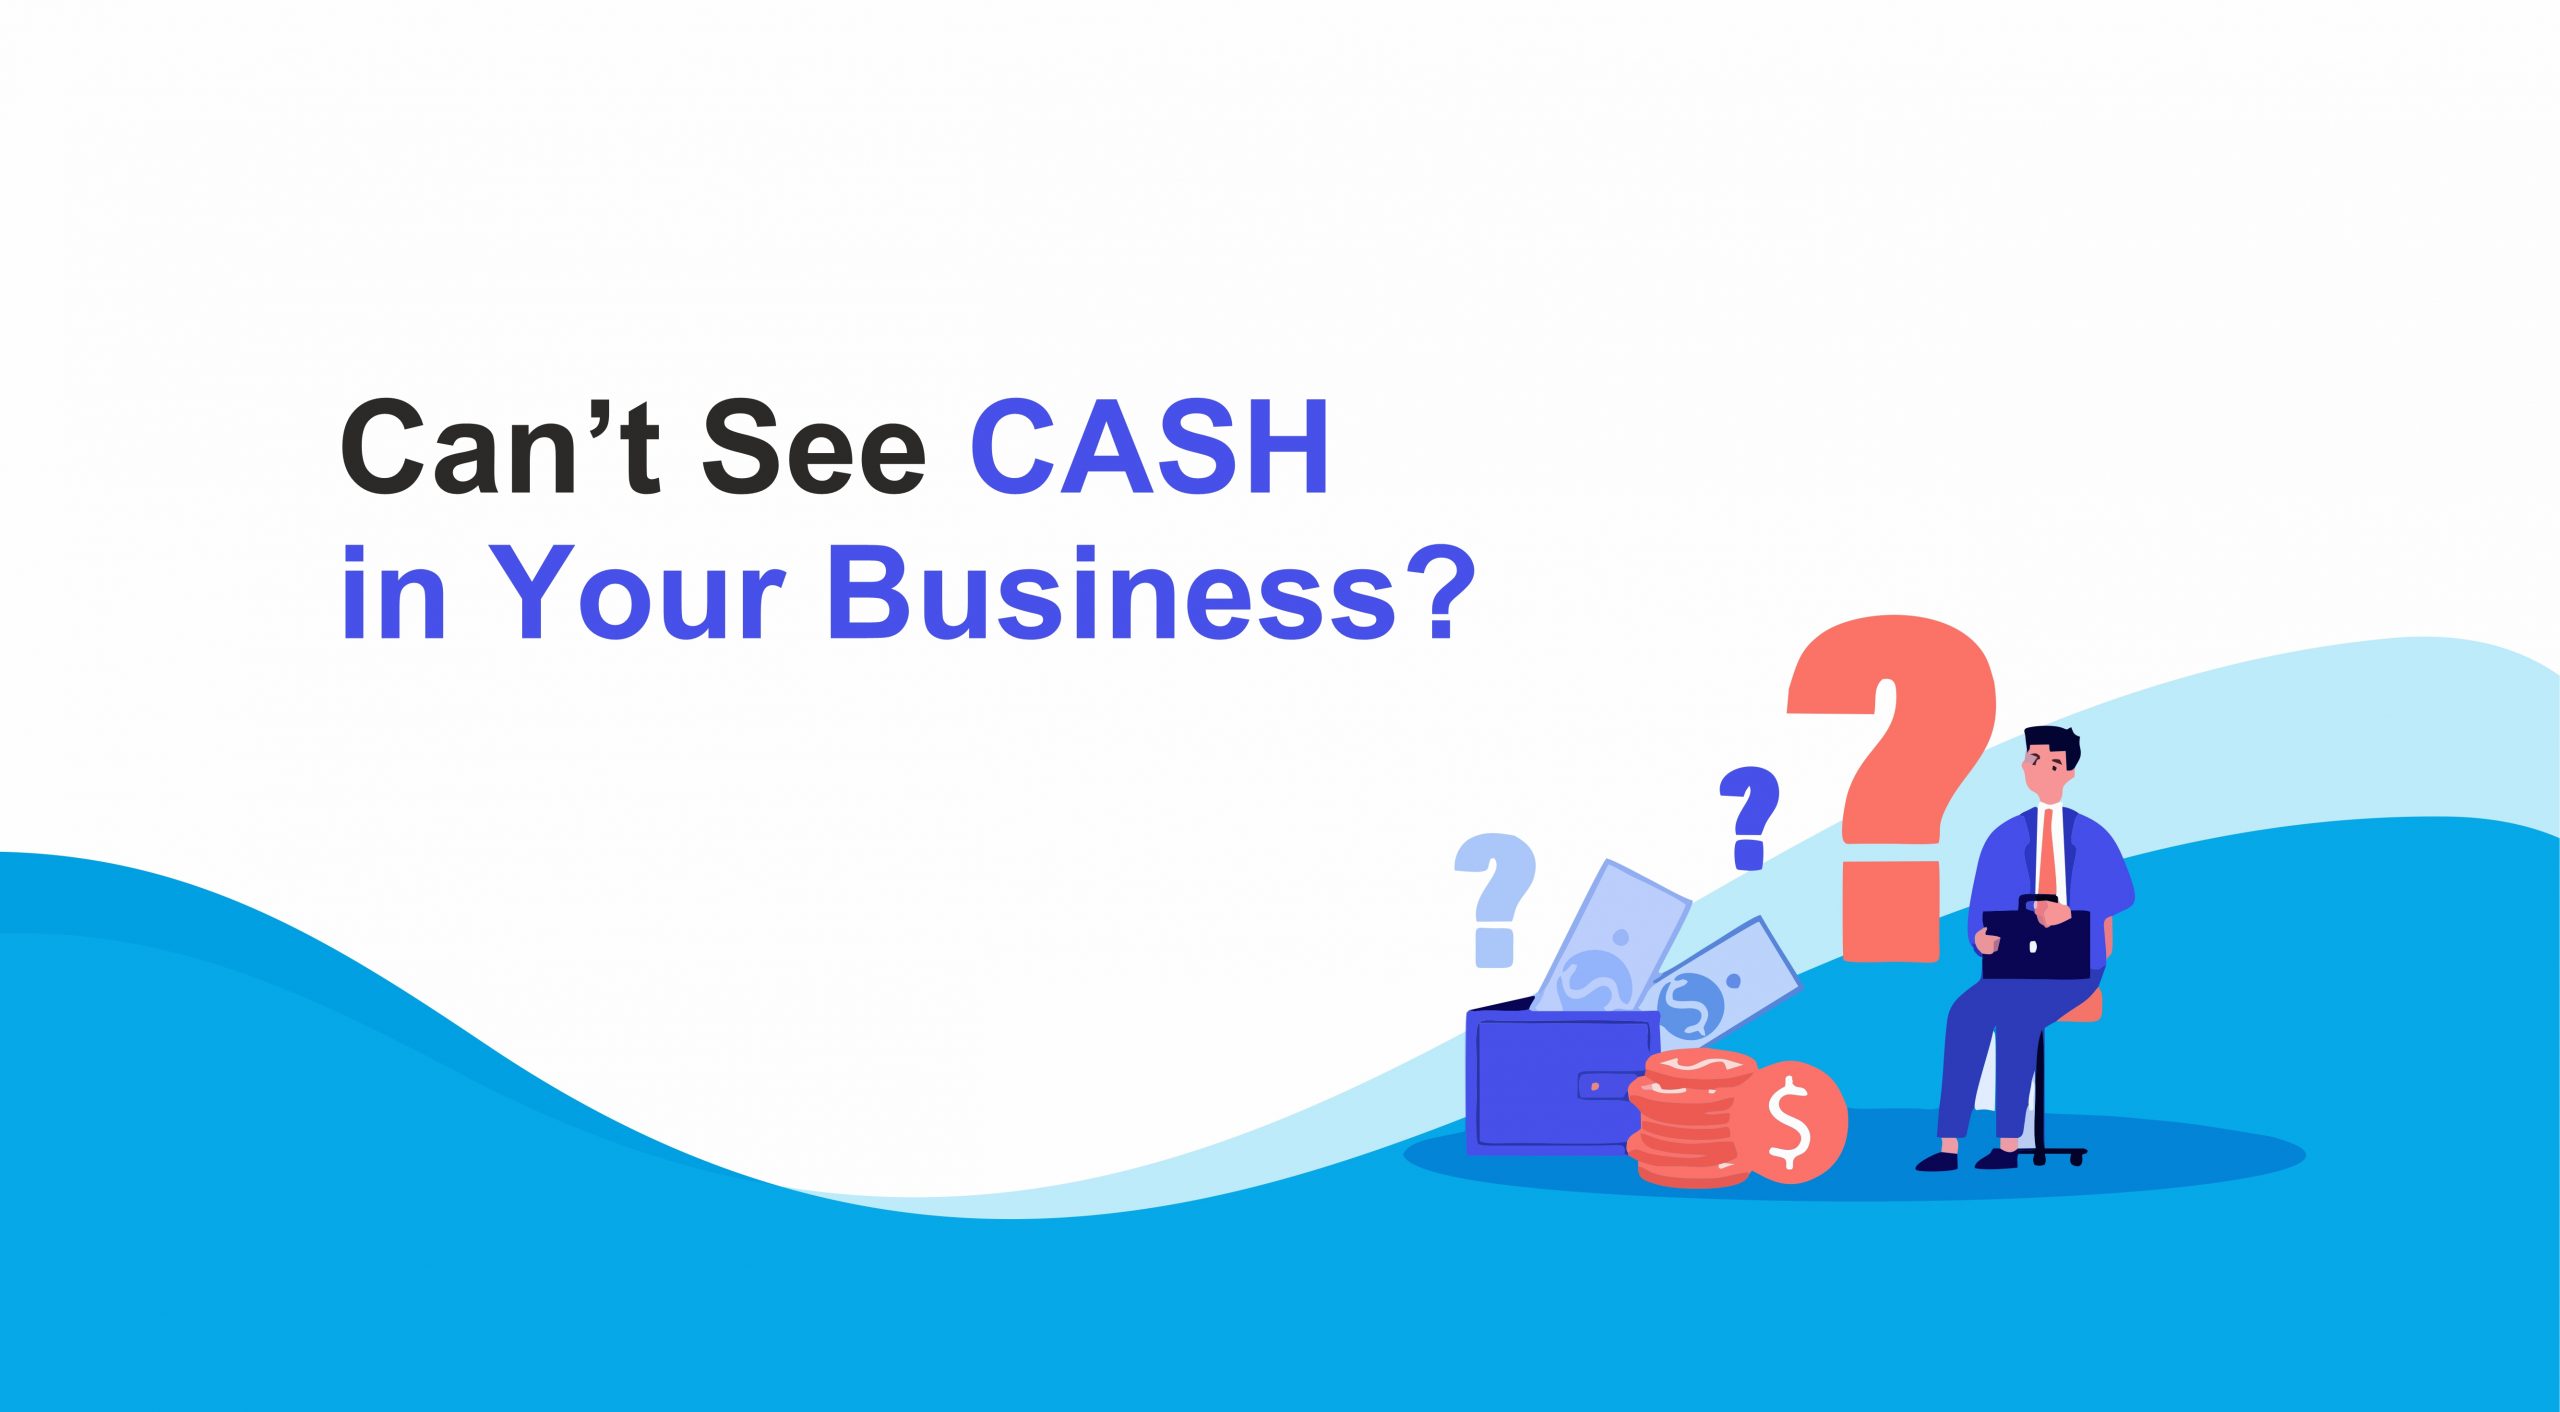 Can’t see CASH in your Business?